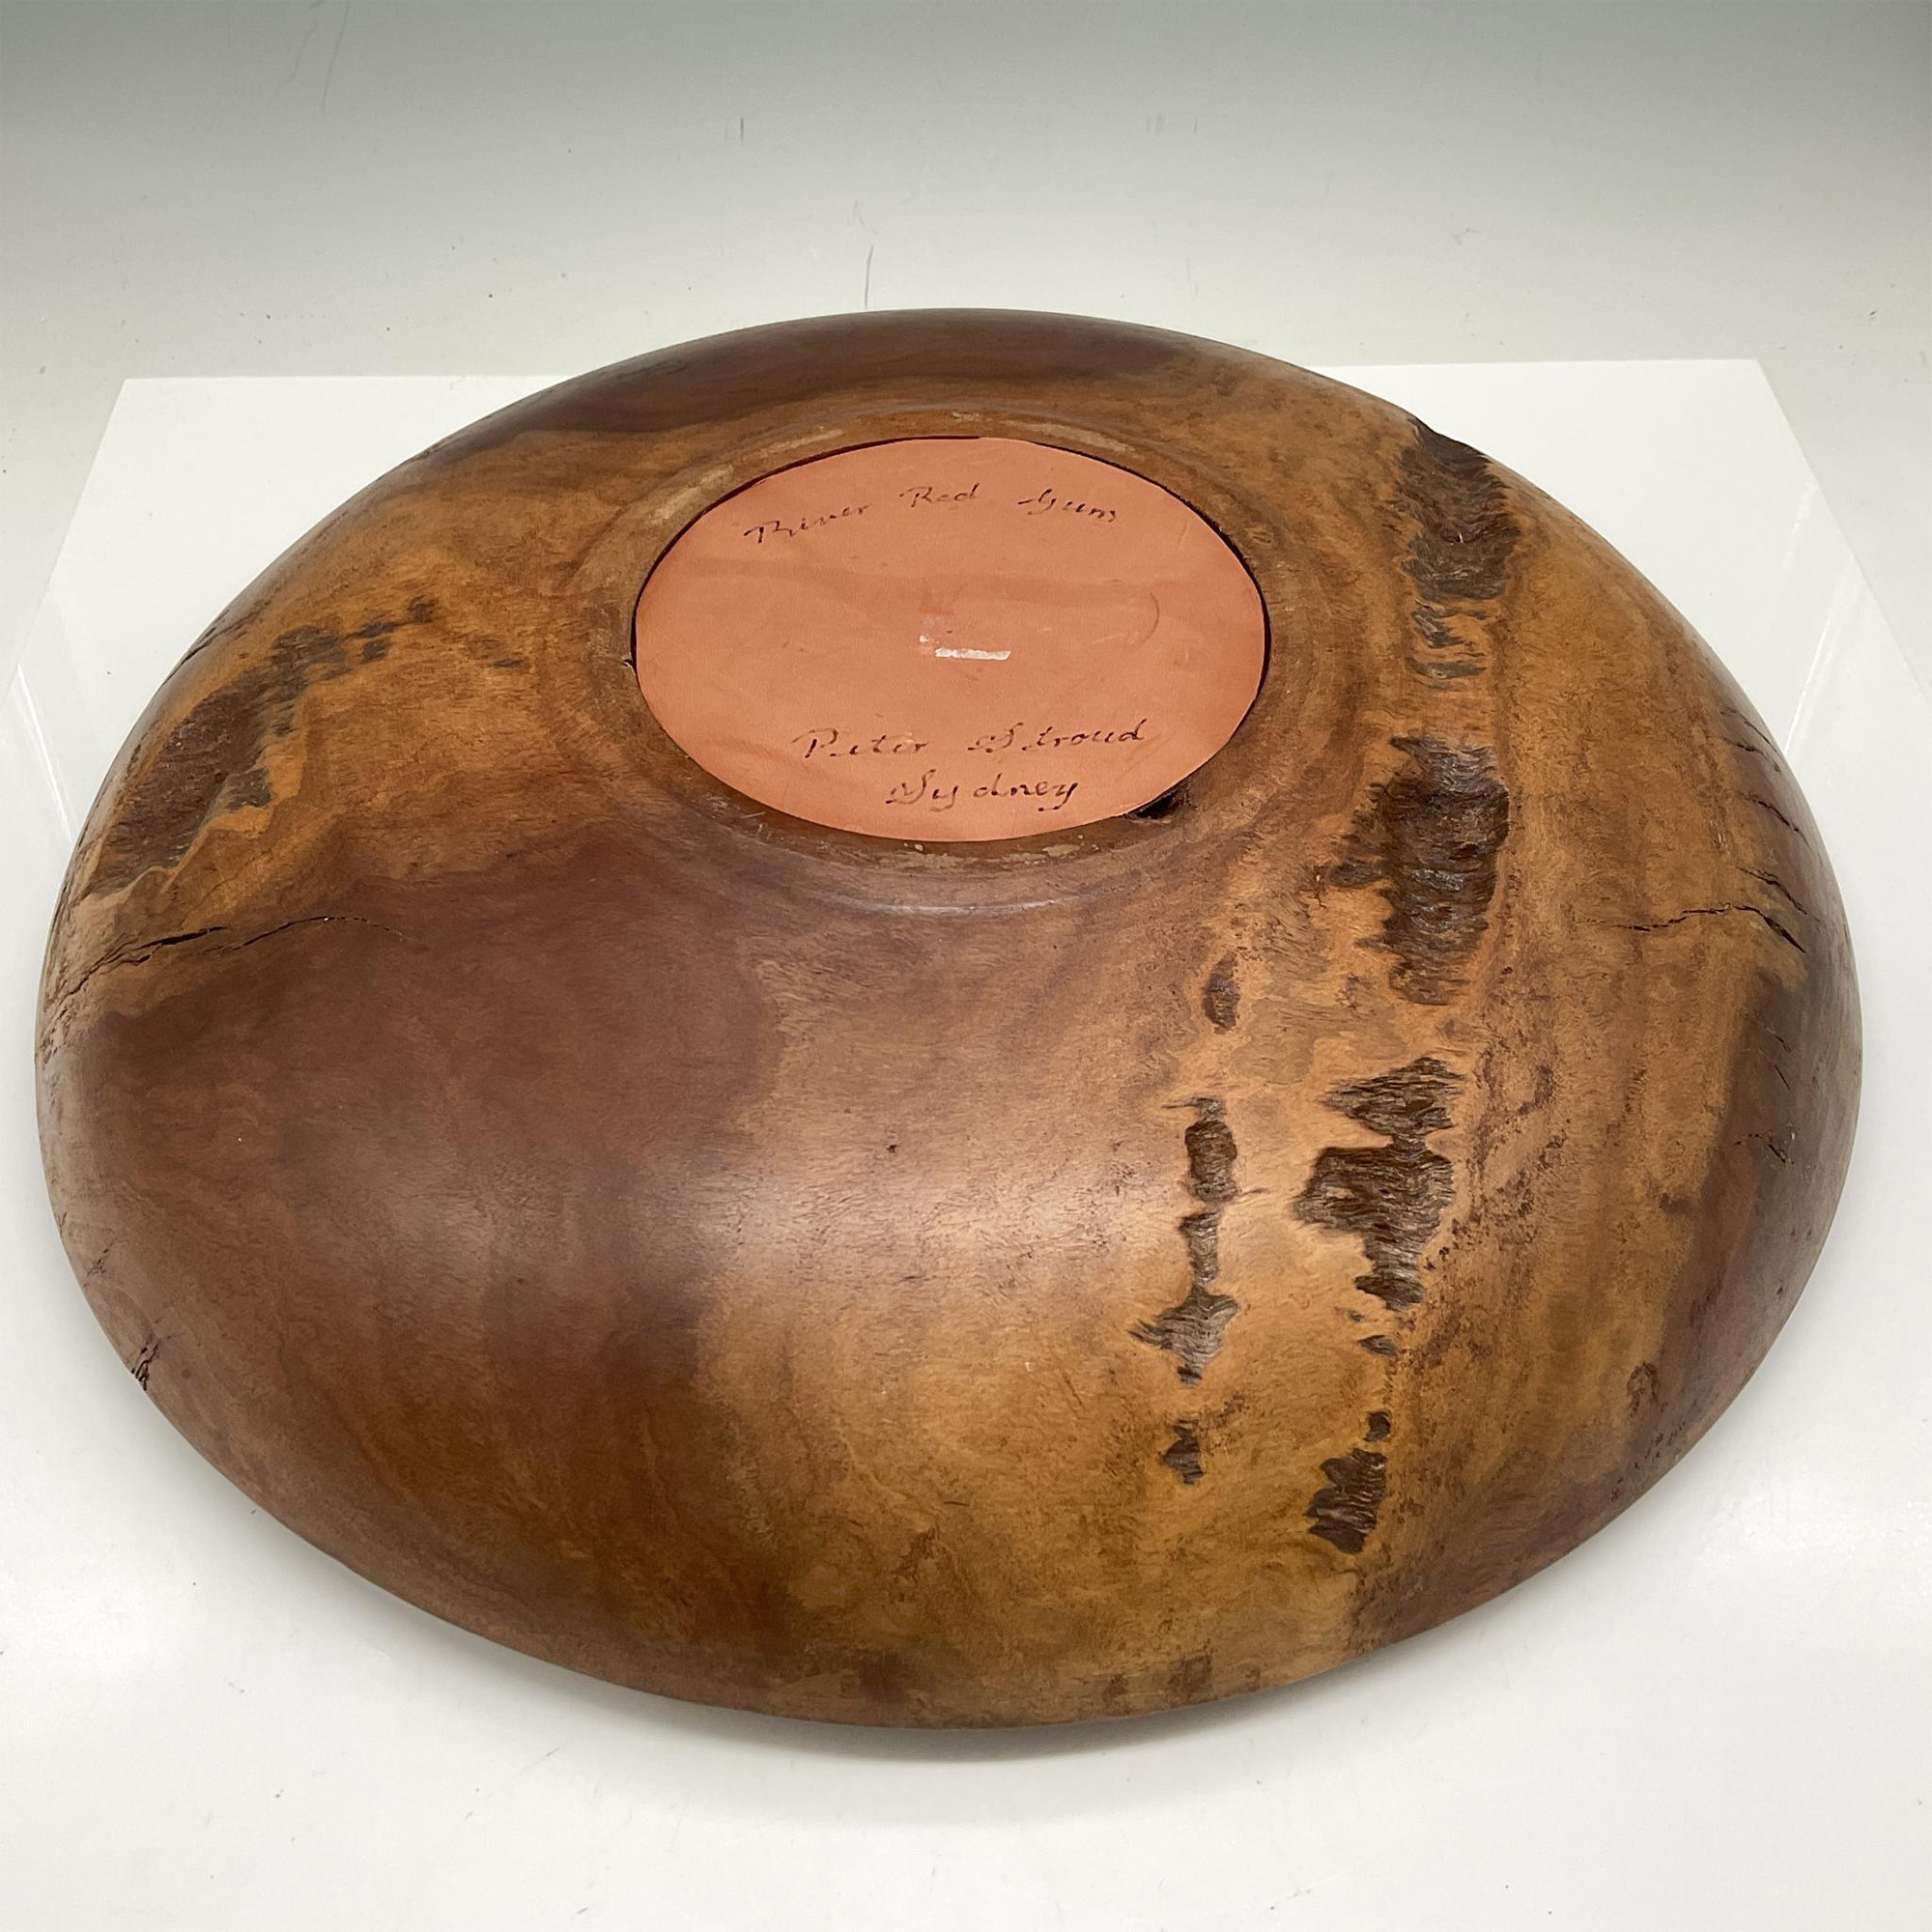 Peter Stroud Carved River Red Gum Wood Console Bowl - Image 3 of 3